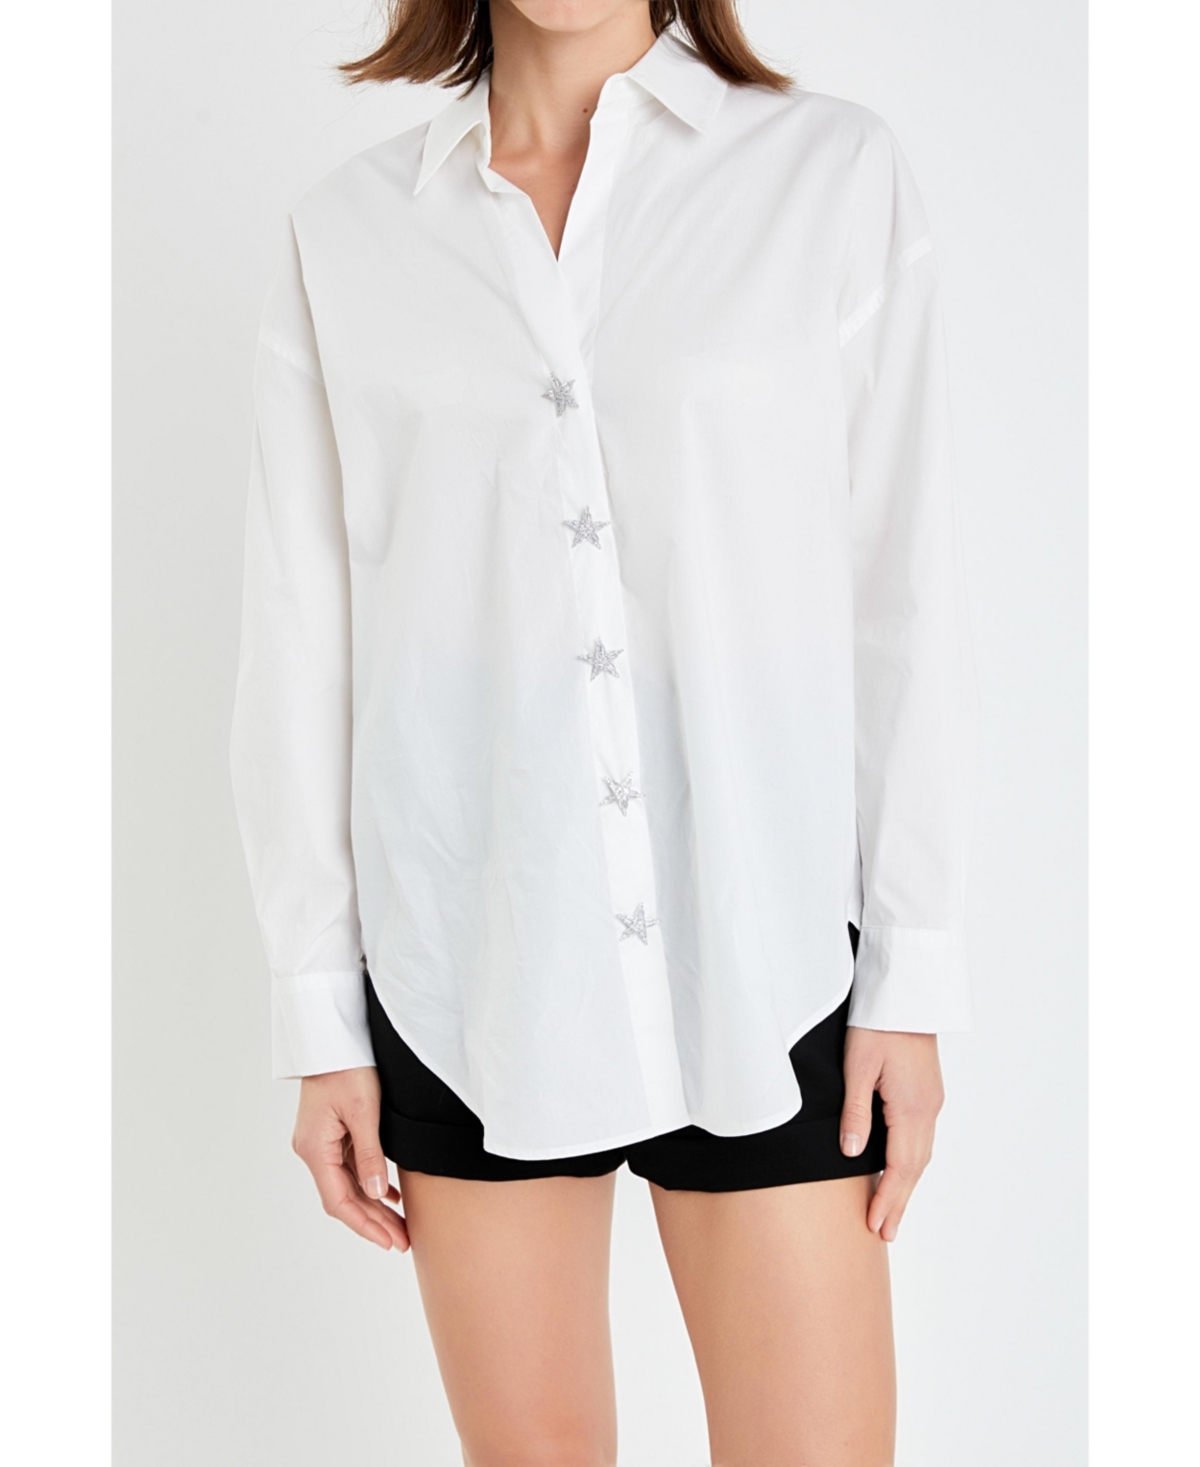 Women's Over d Collared Button Detail Shirt - White